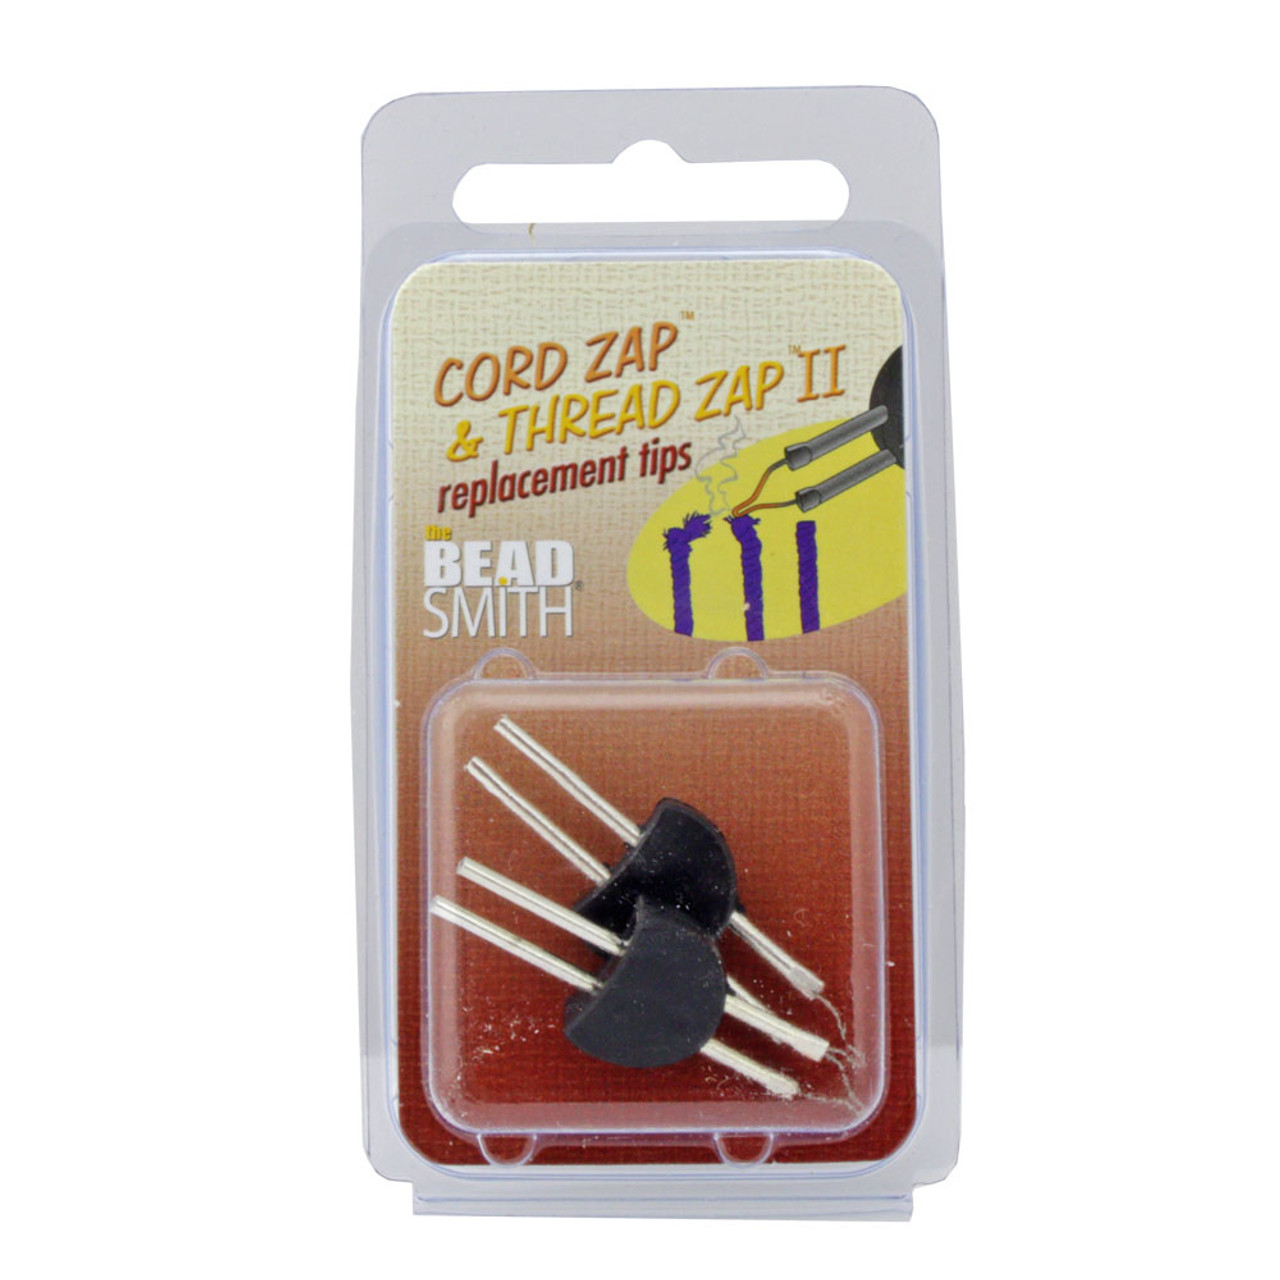 Replacement tips for thread burner Thread Zap II